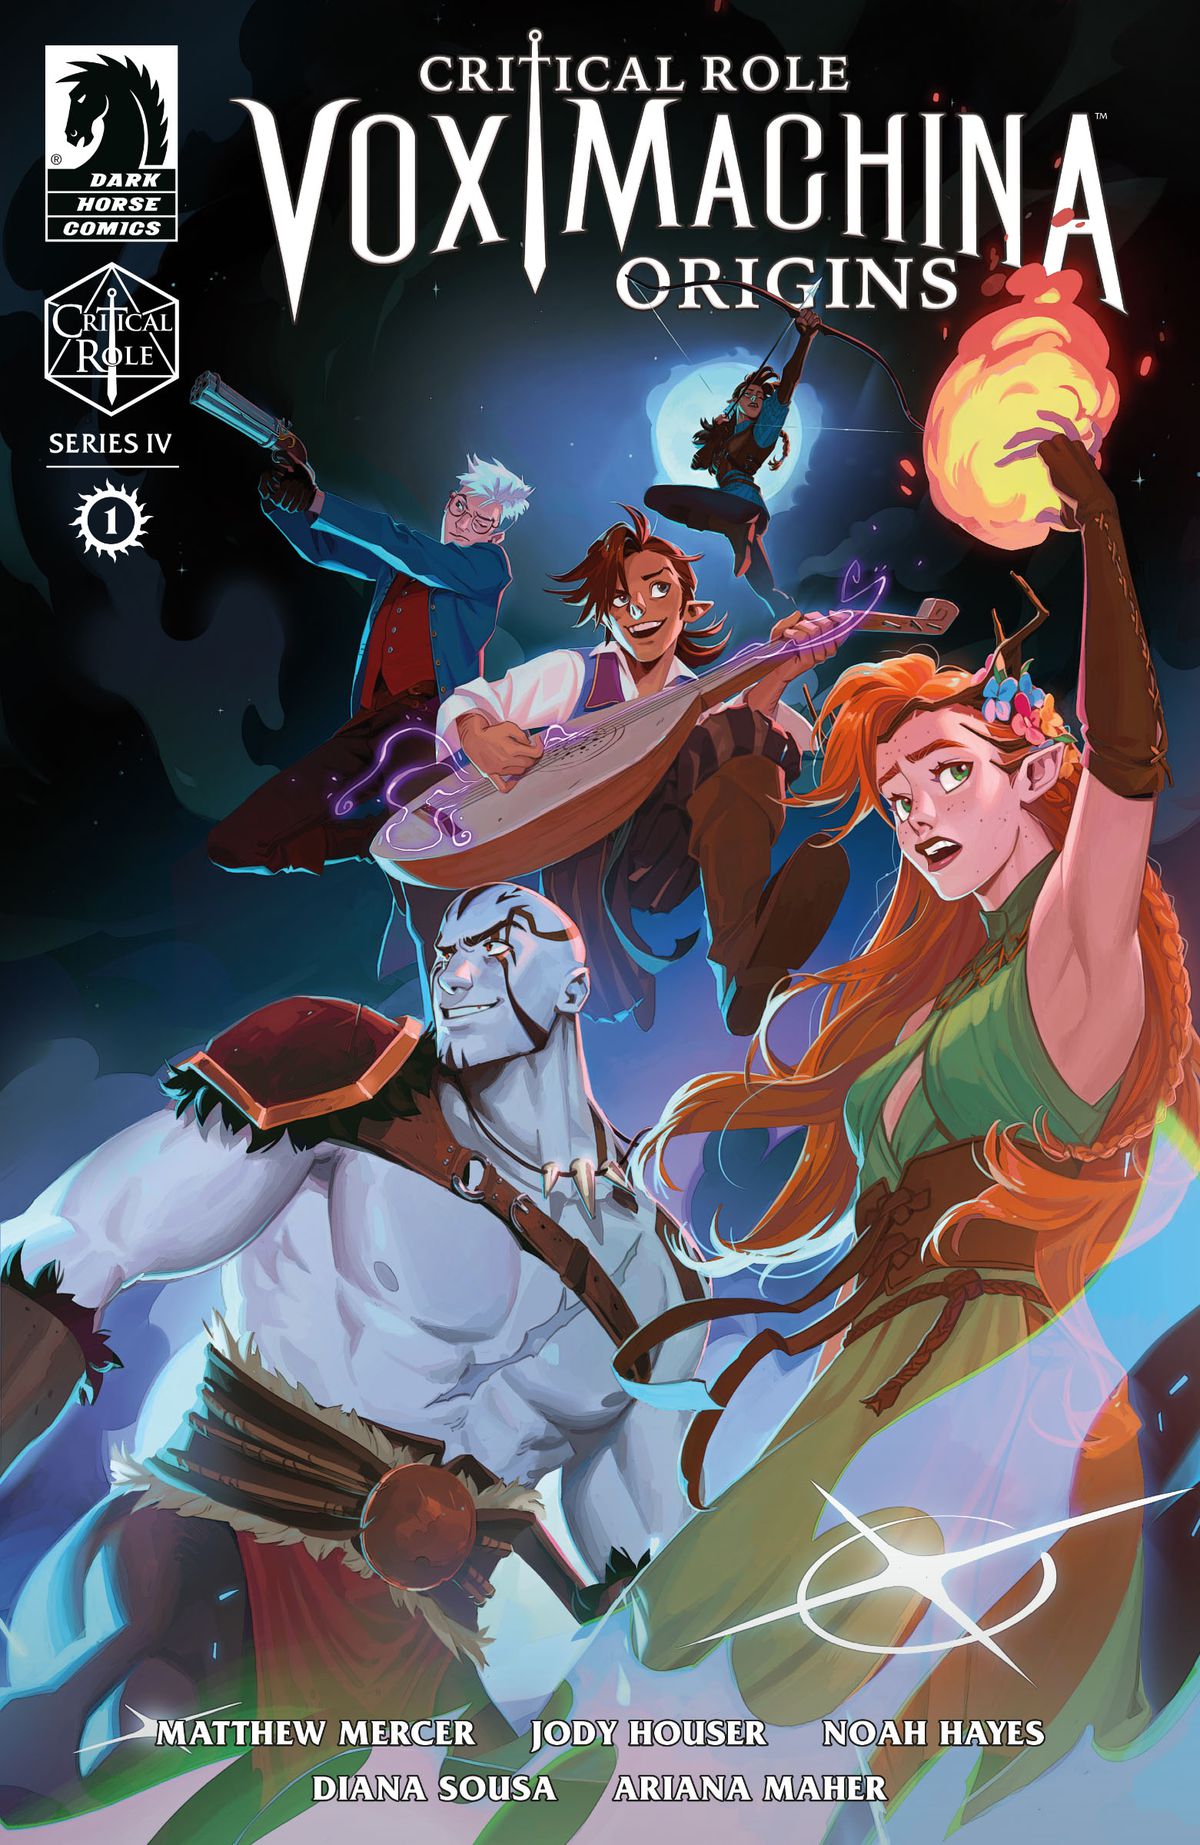 The adventuring party known as Vox Machina poses mid-battle on the cover of Critical Role: Vox Machina Origins IV #1.